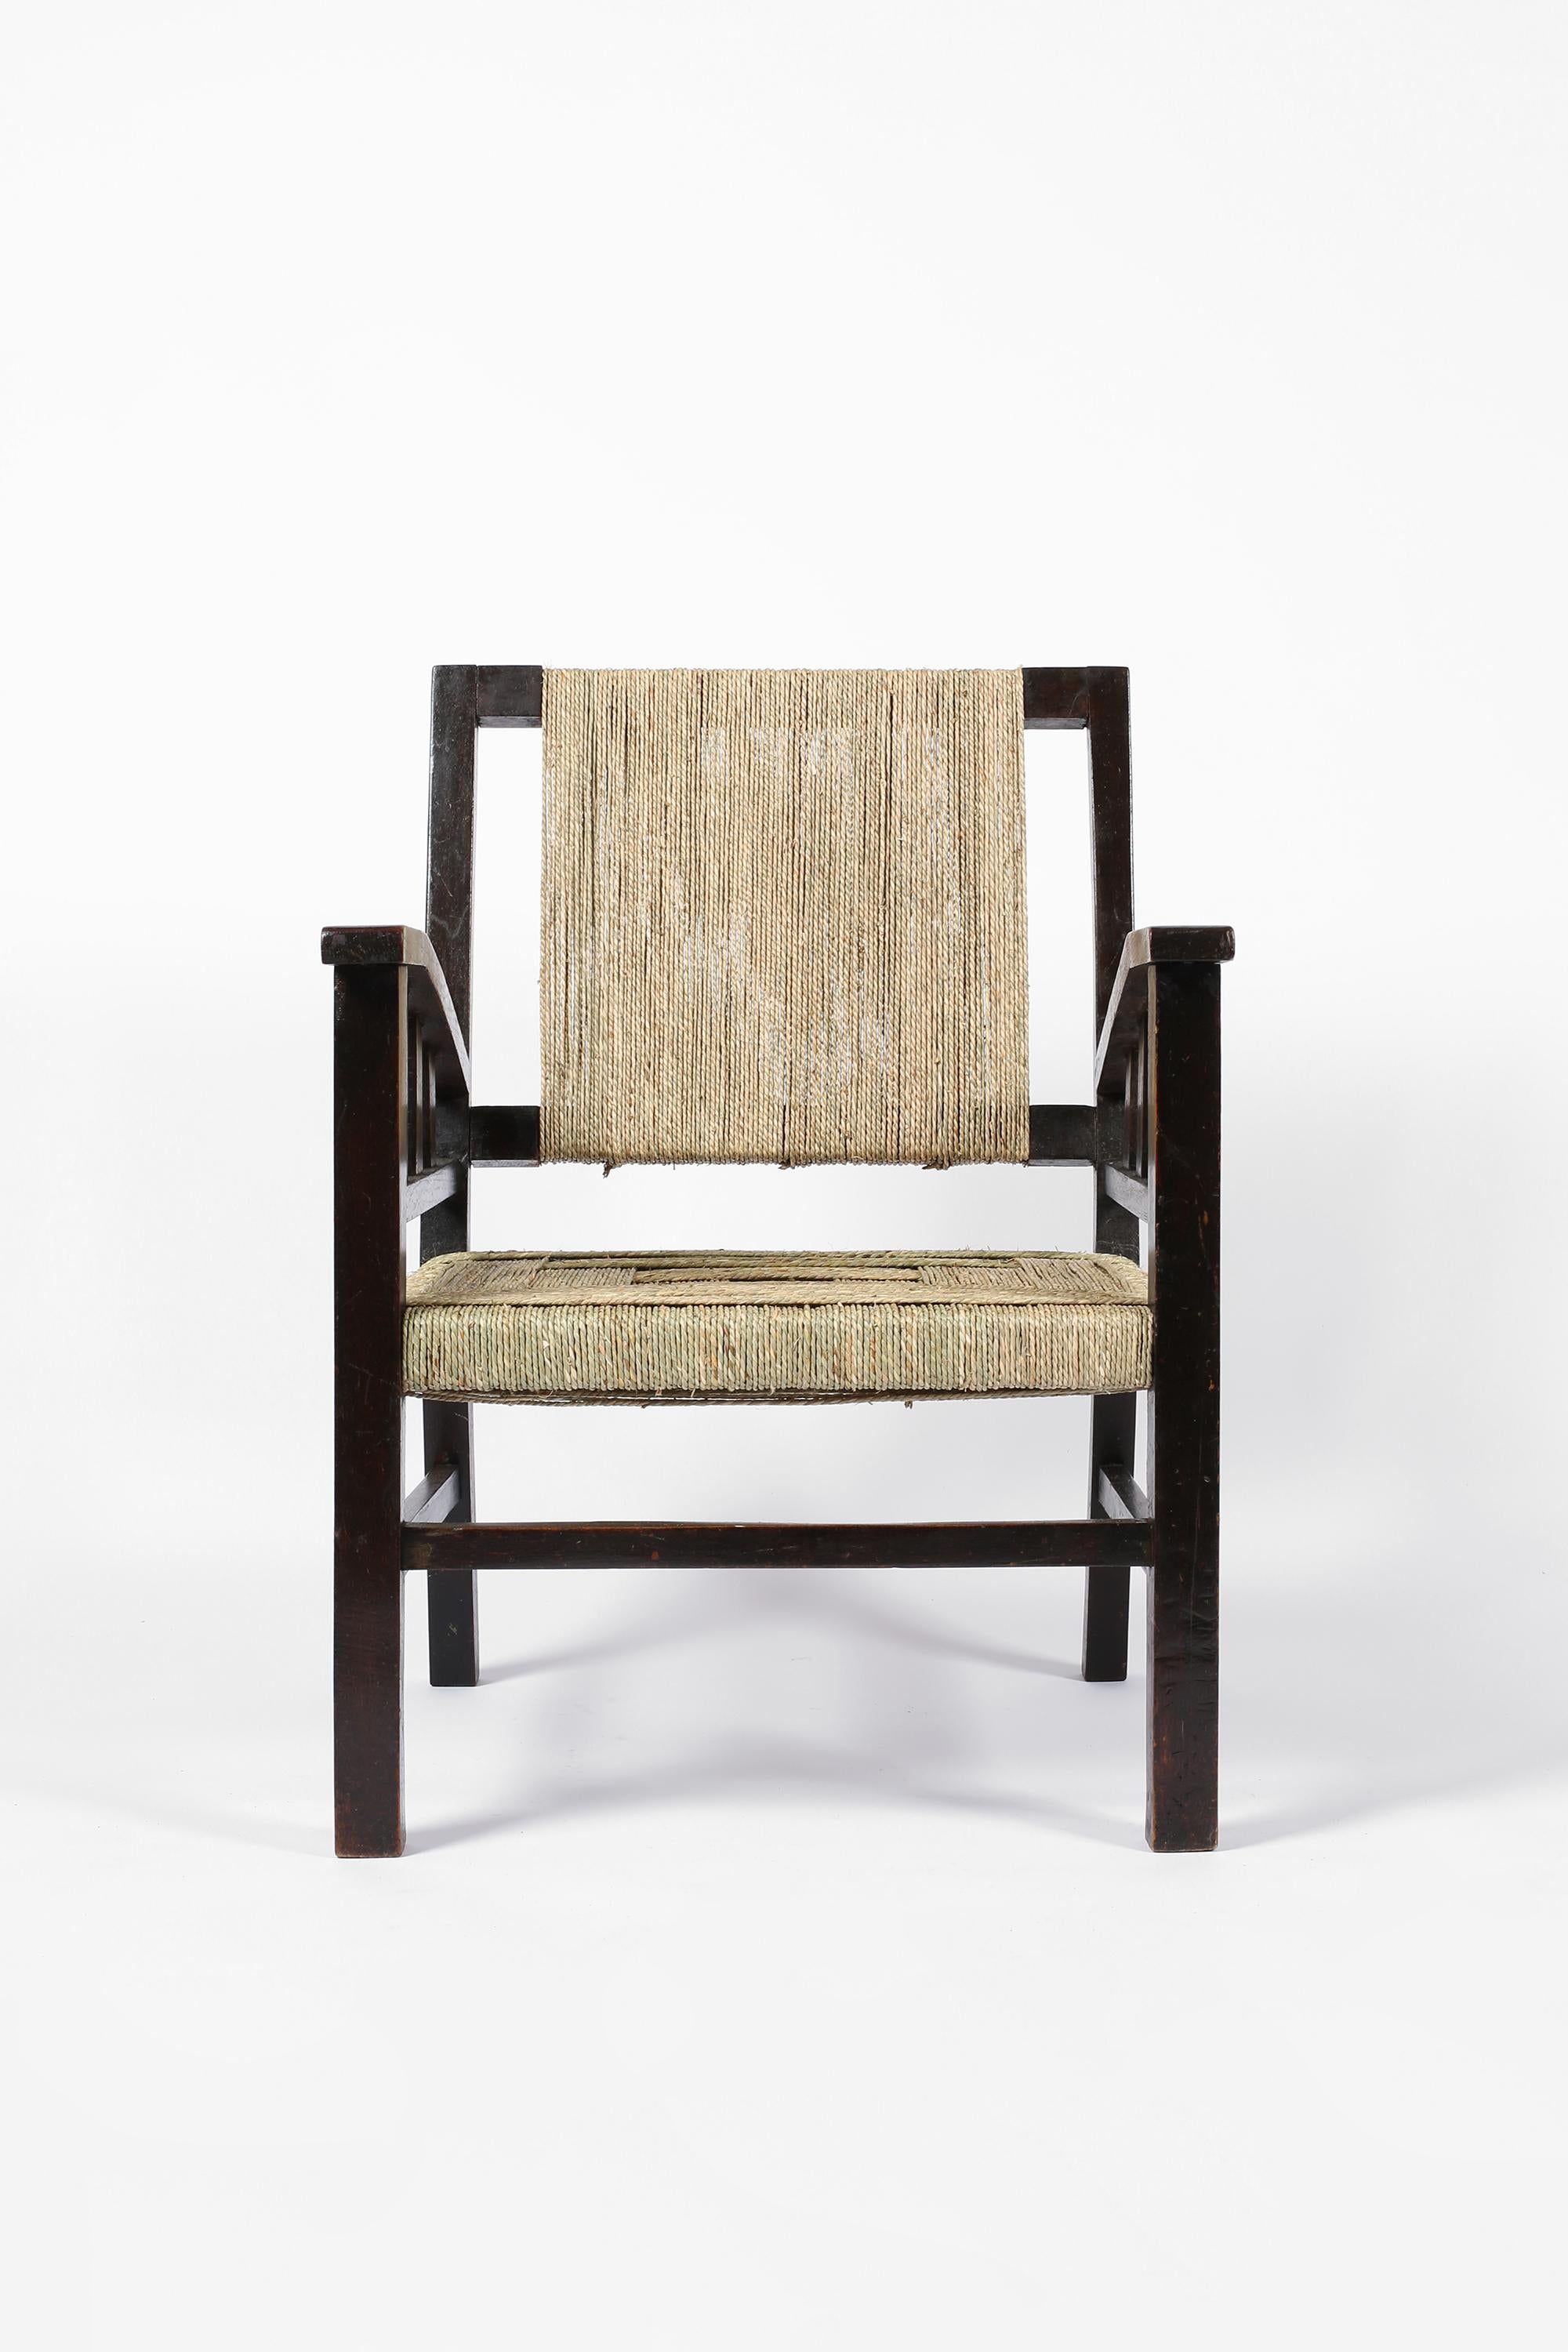 Hand-Woven 1930s French Modernist Art Deco Armchair by Francis Jourdain in Beech and Rope For Sale